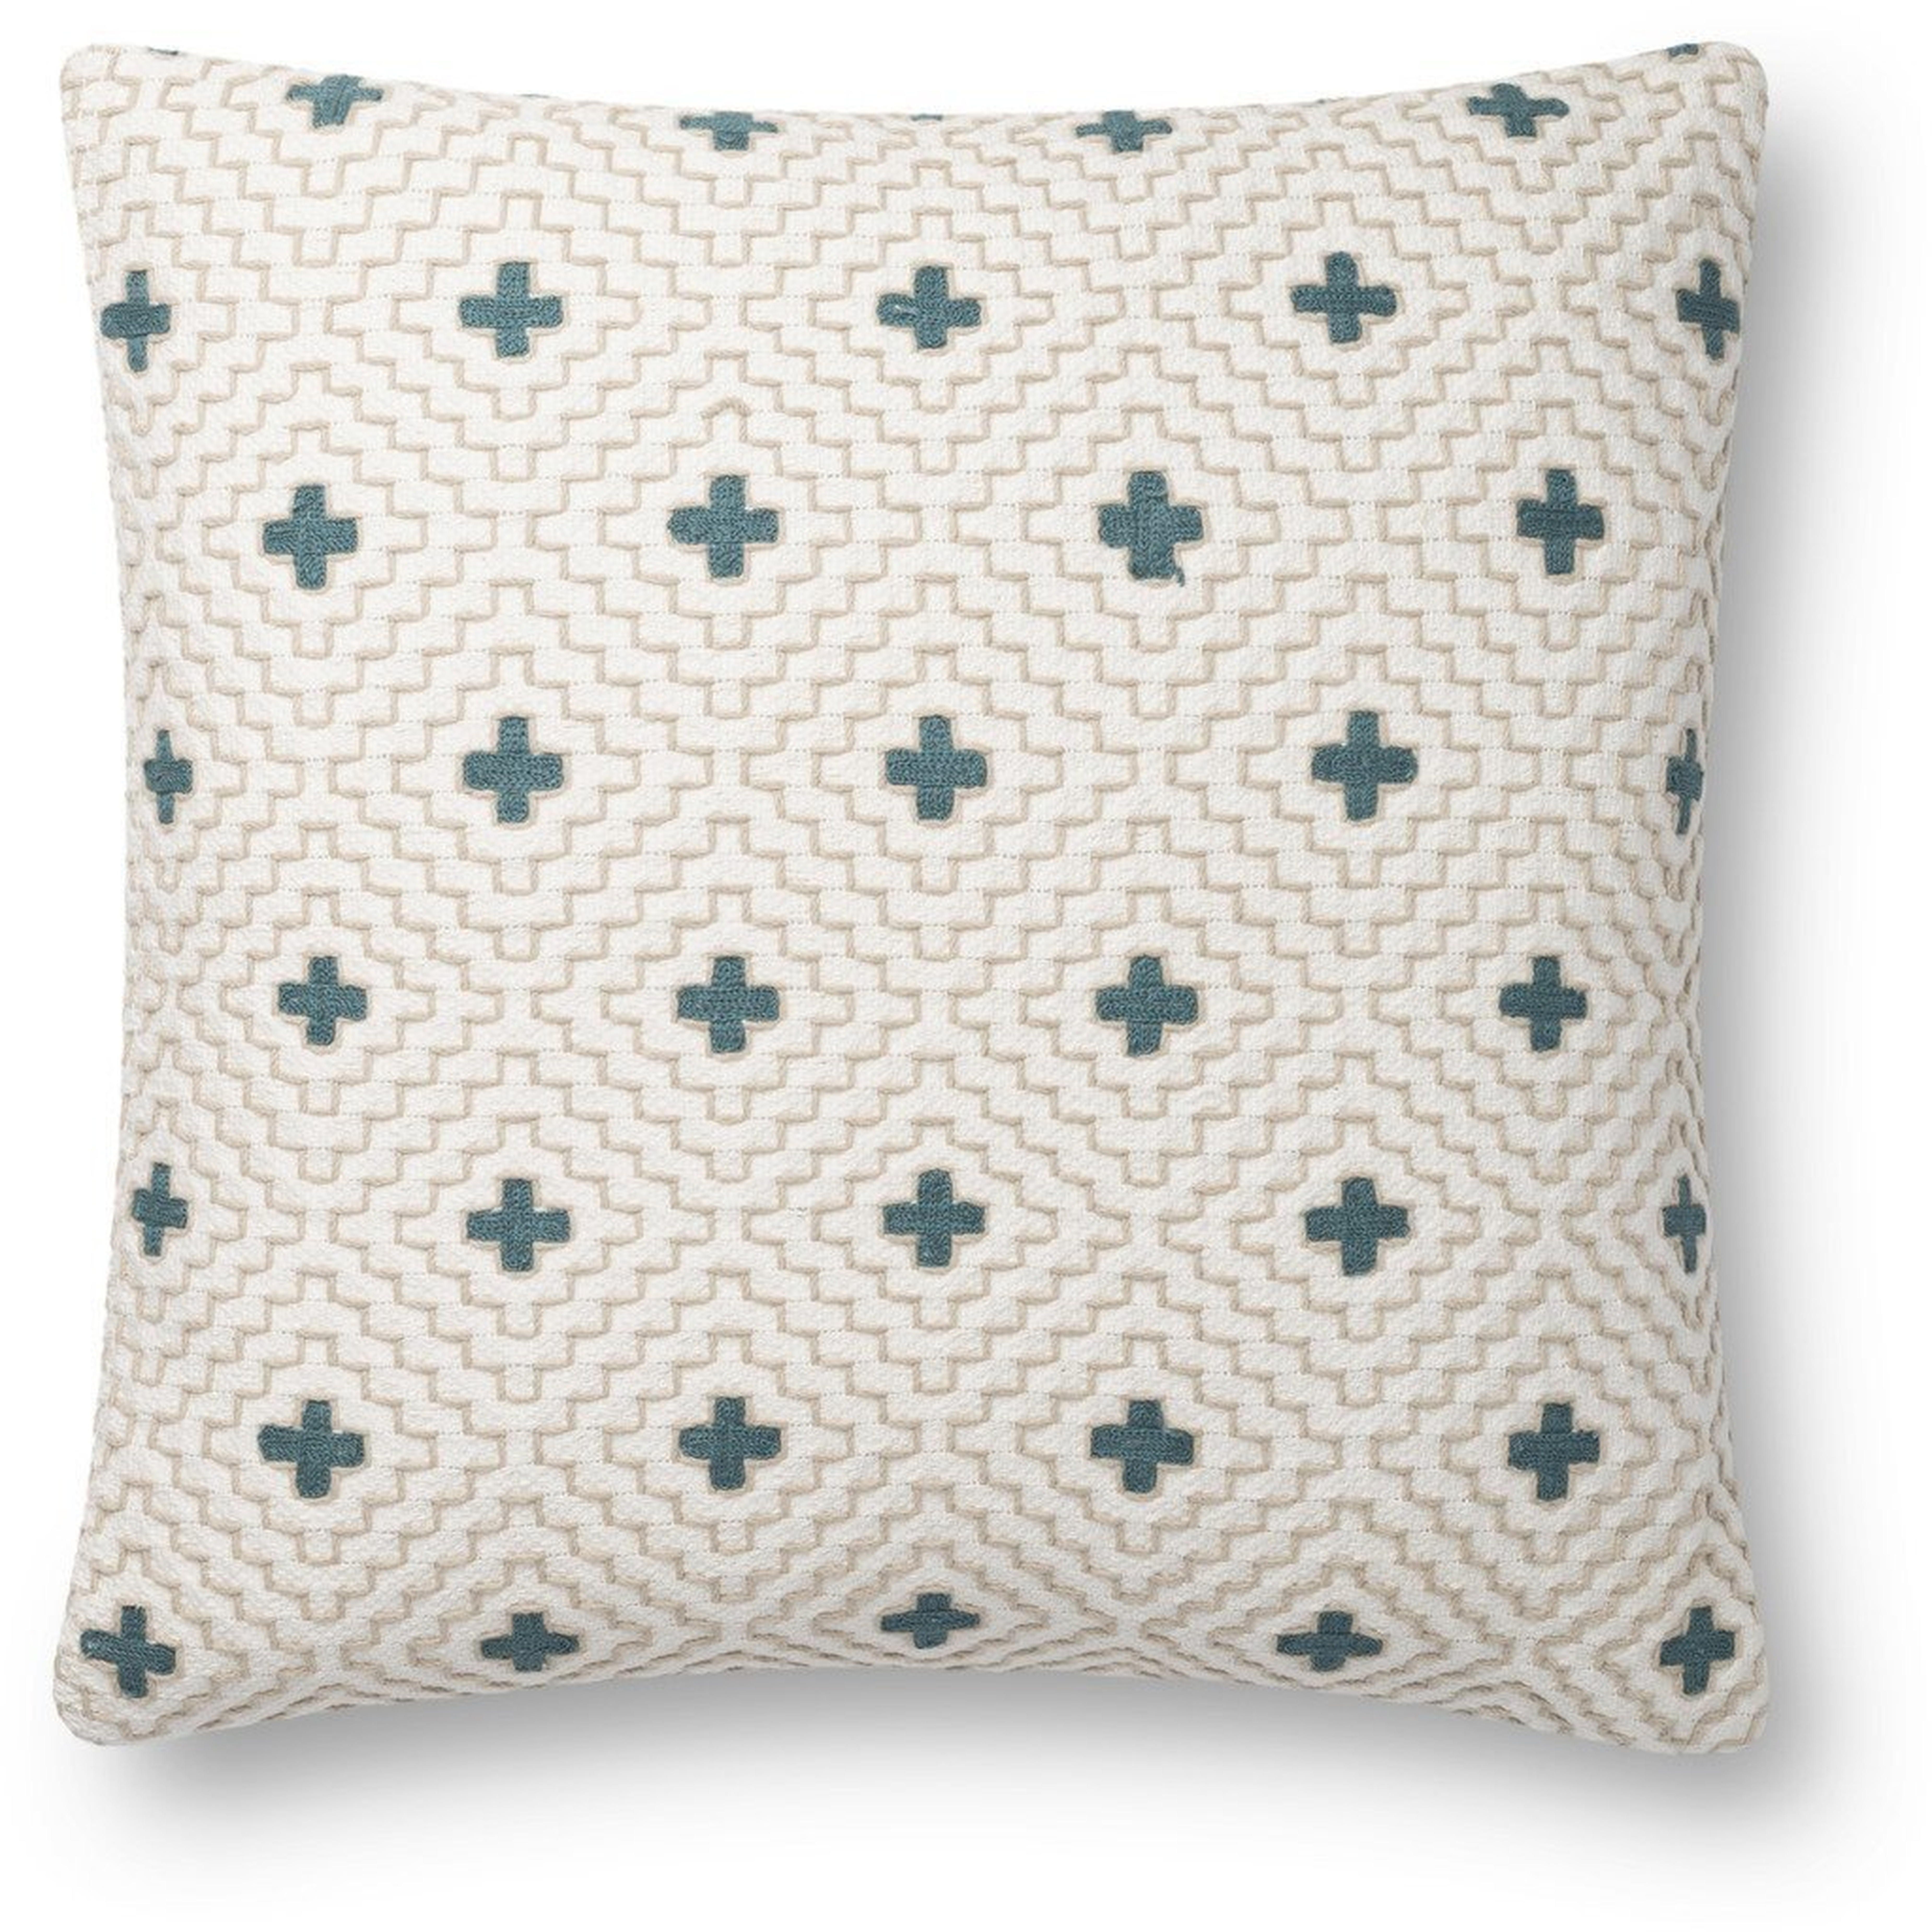 Throw Pillow, 22" x 22", Ivory & Teal - Loma Threads